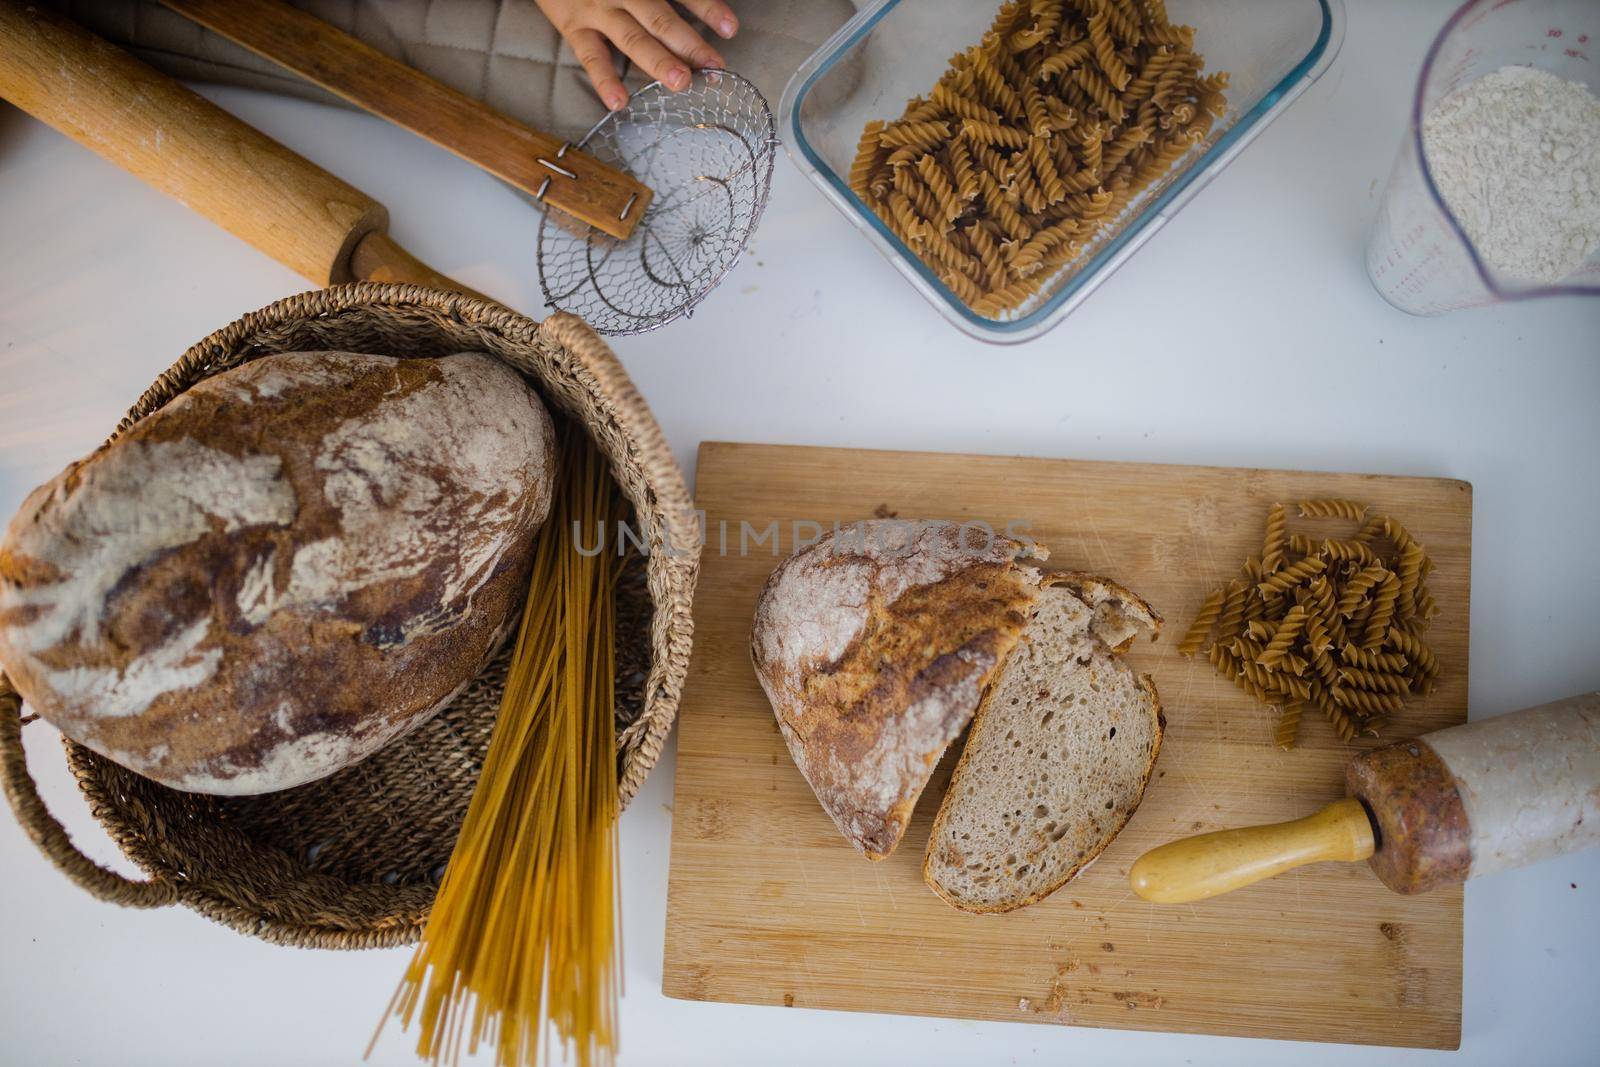 Bread, pasta, flour, and wooden cookware on white table from above. Ingredients and carbohydrates on cutting board and a basket. Healthy meal preparation